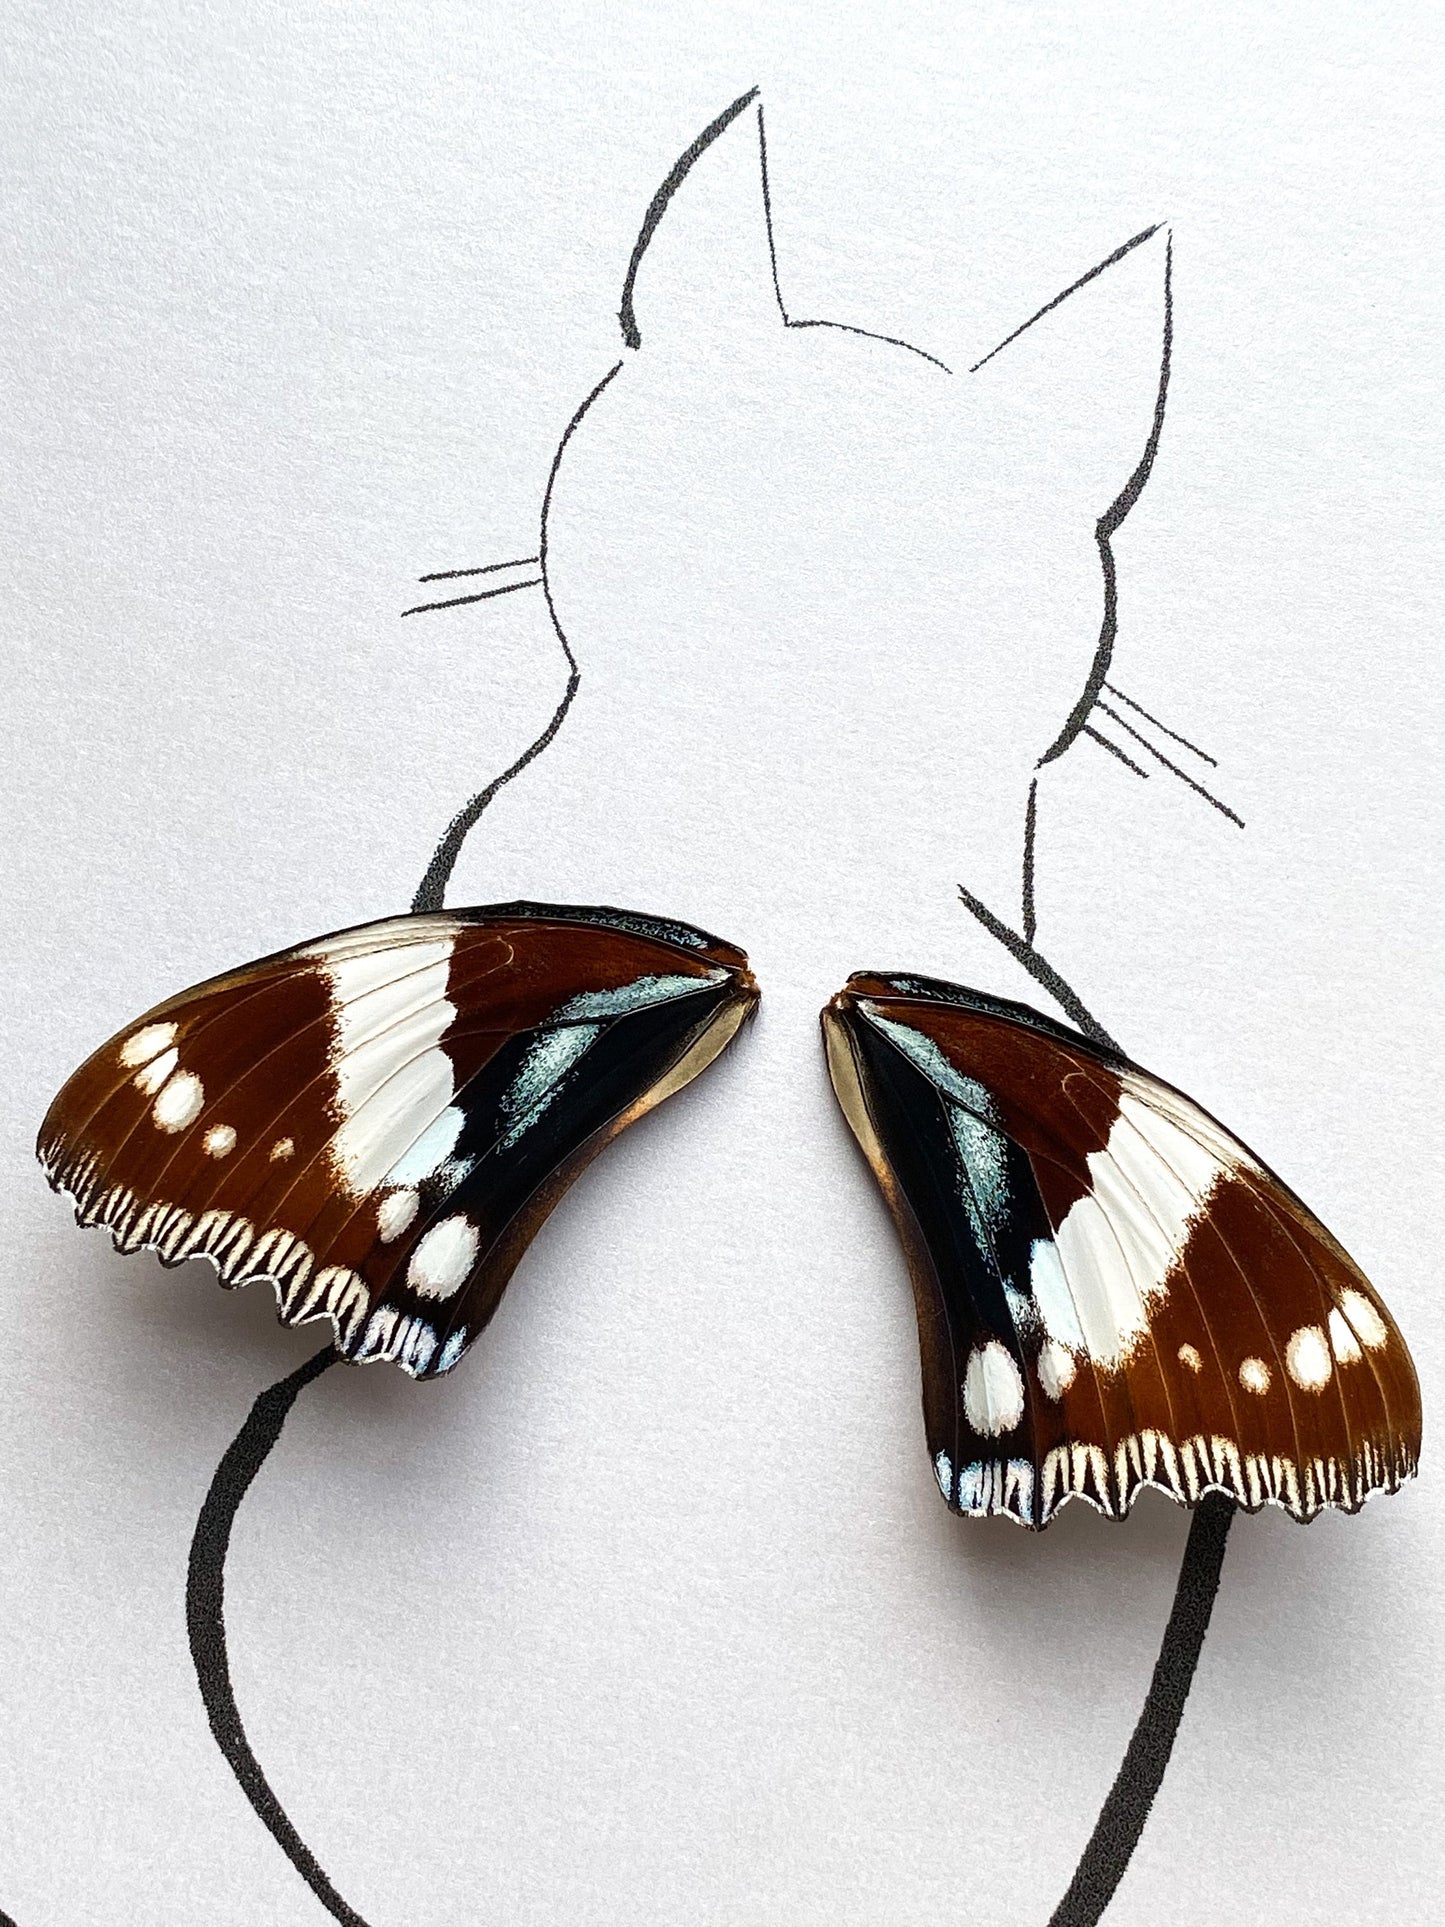 Cat Real Butterfly Wings Art Ethically Sourced Made in MN USA - Holly Ulm - Isms Butterfly Conservation Art